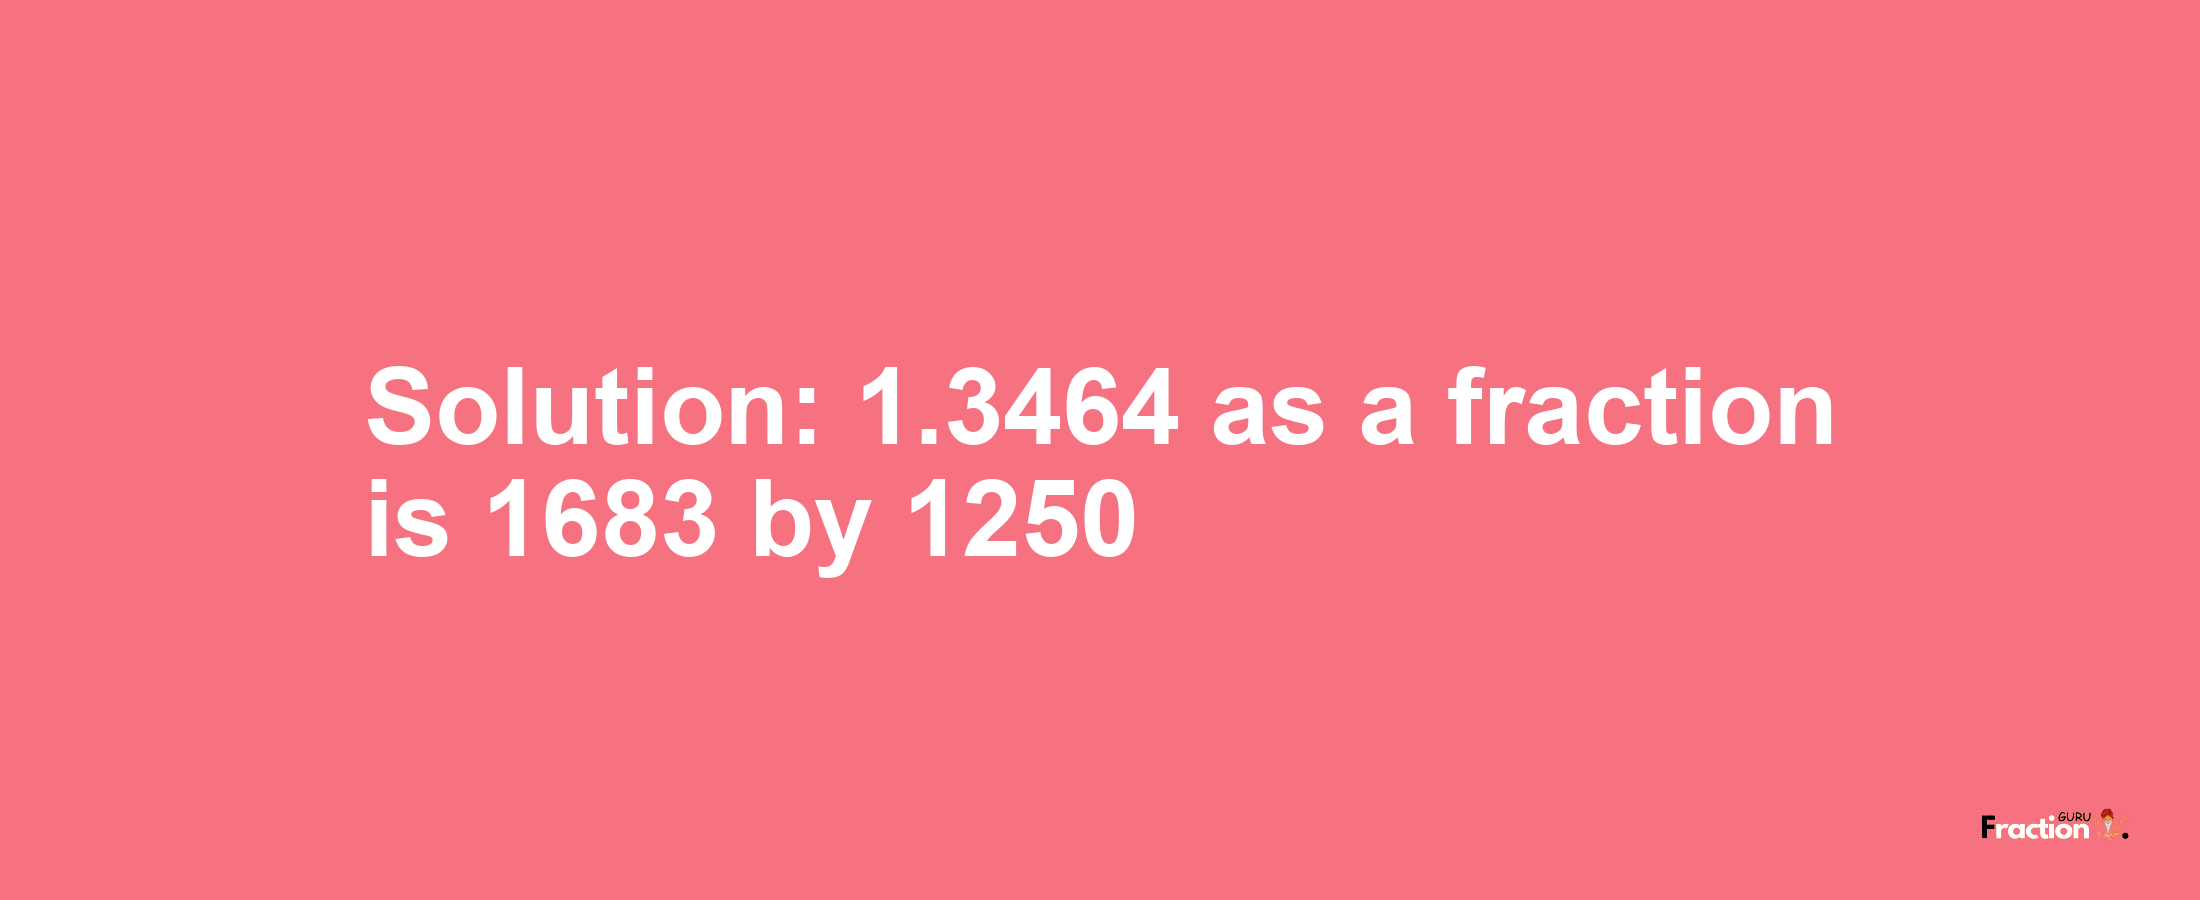 Solution:1.3464 as a fraction is 1683/1250